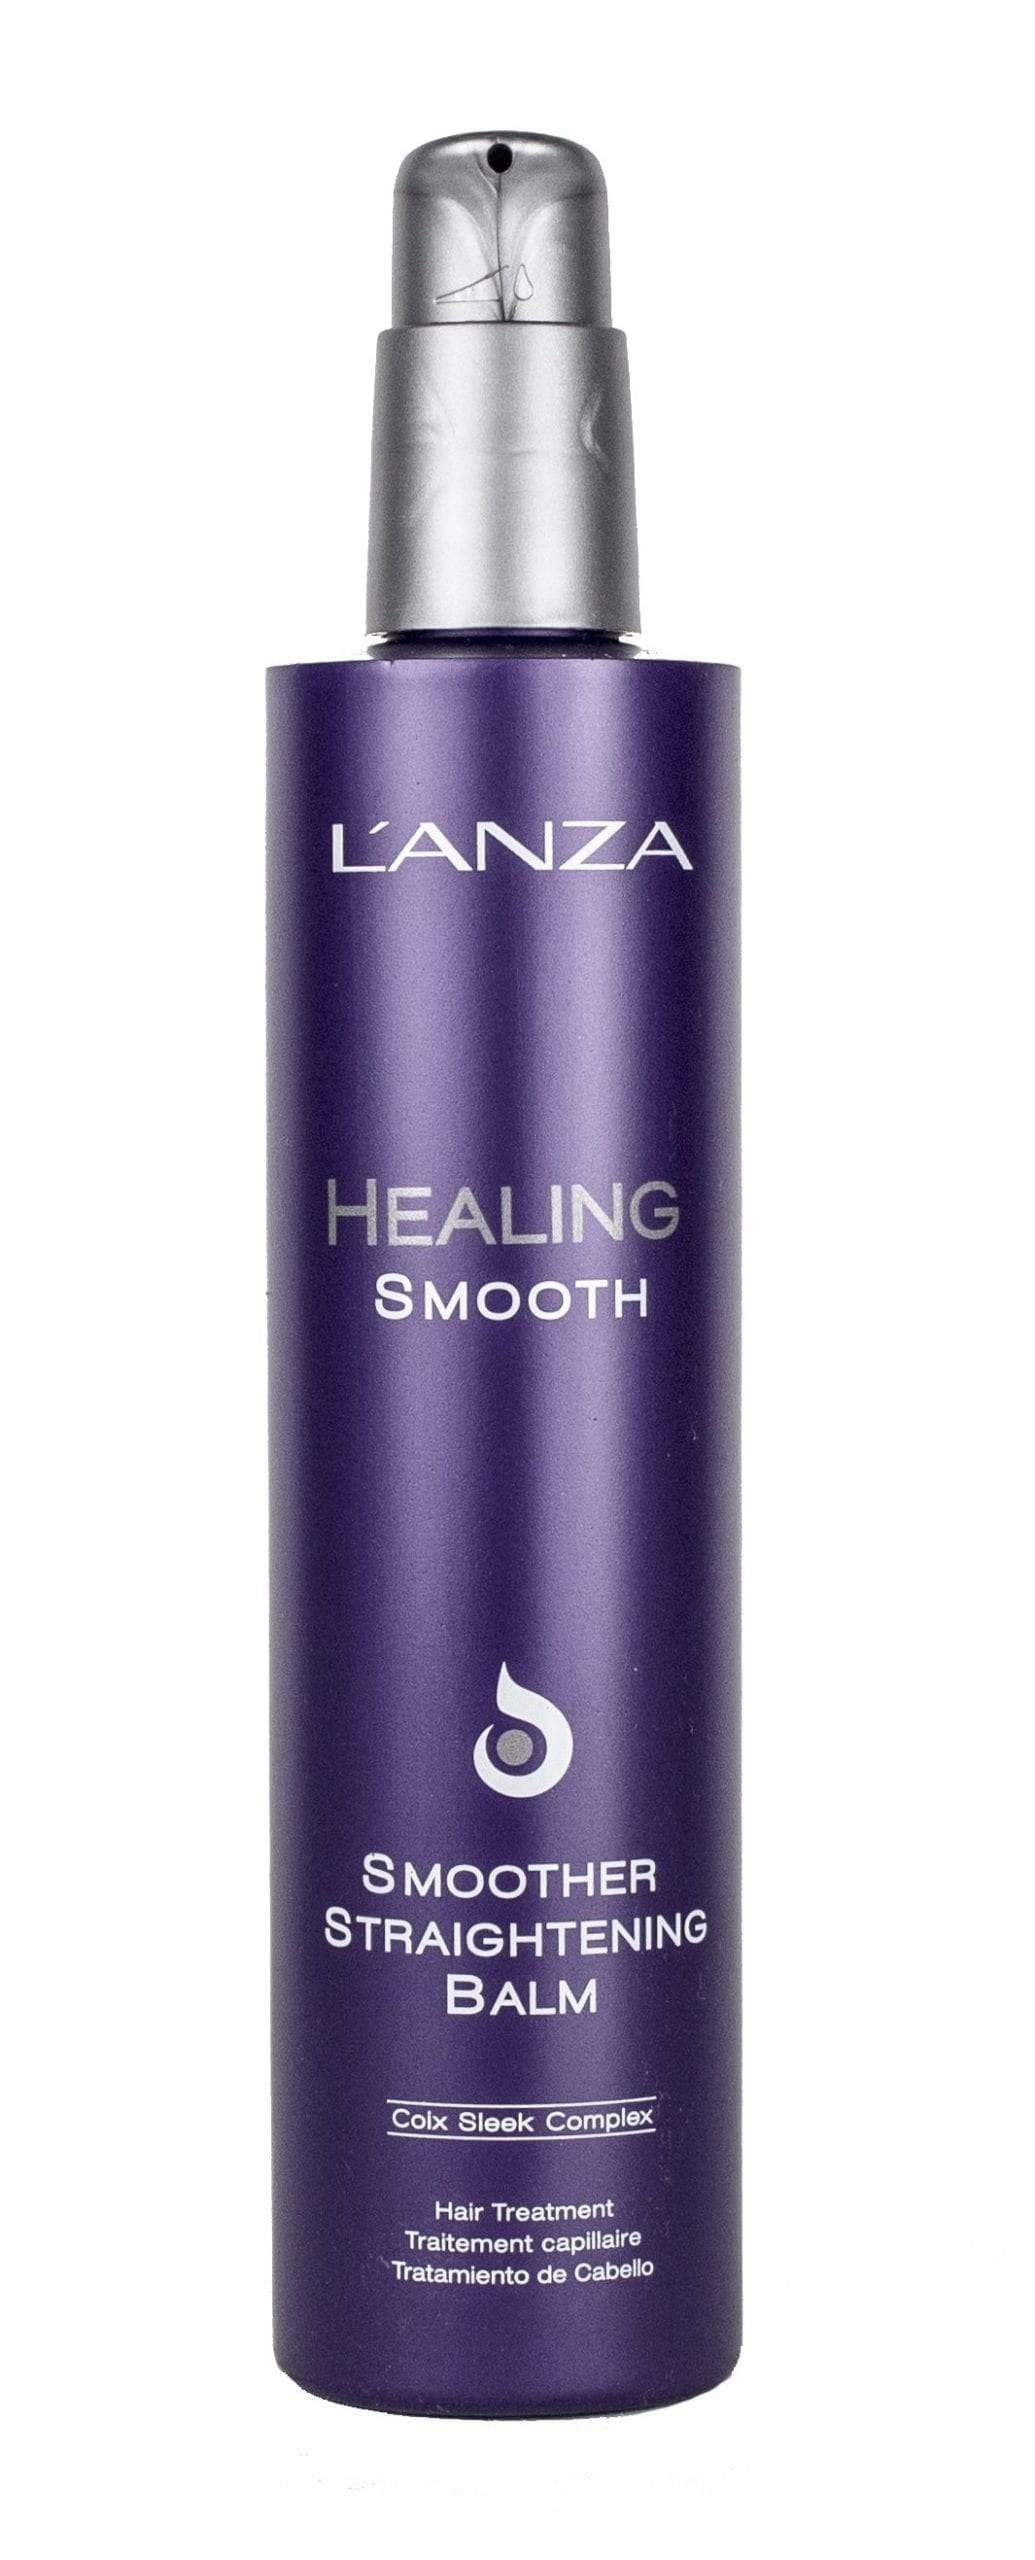 L'ANZA | HEALING SMOOTH Smoother Straightening Balm | 250 ml